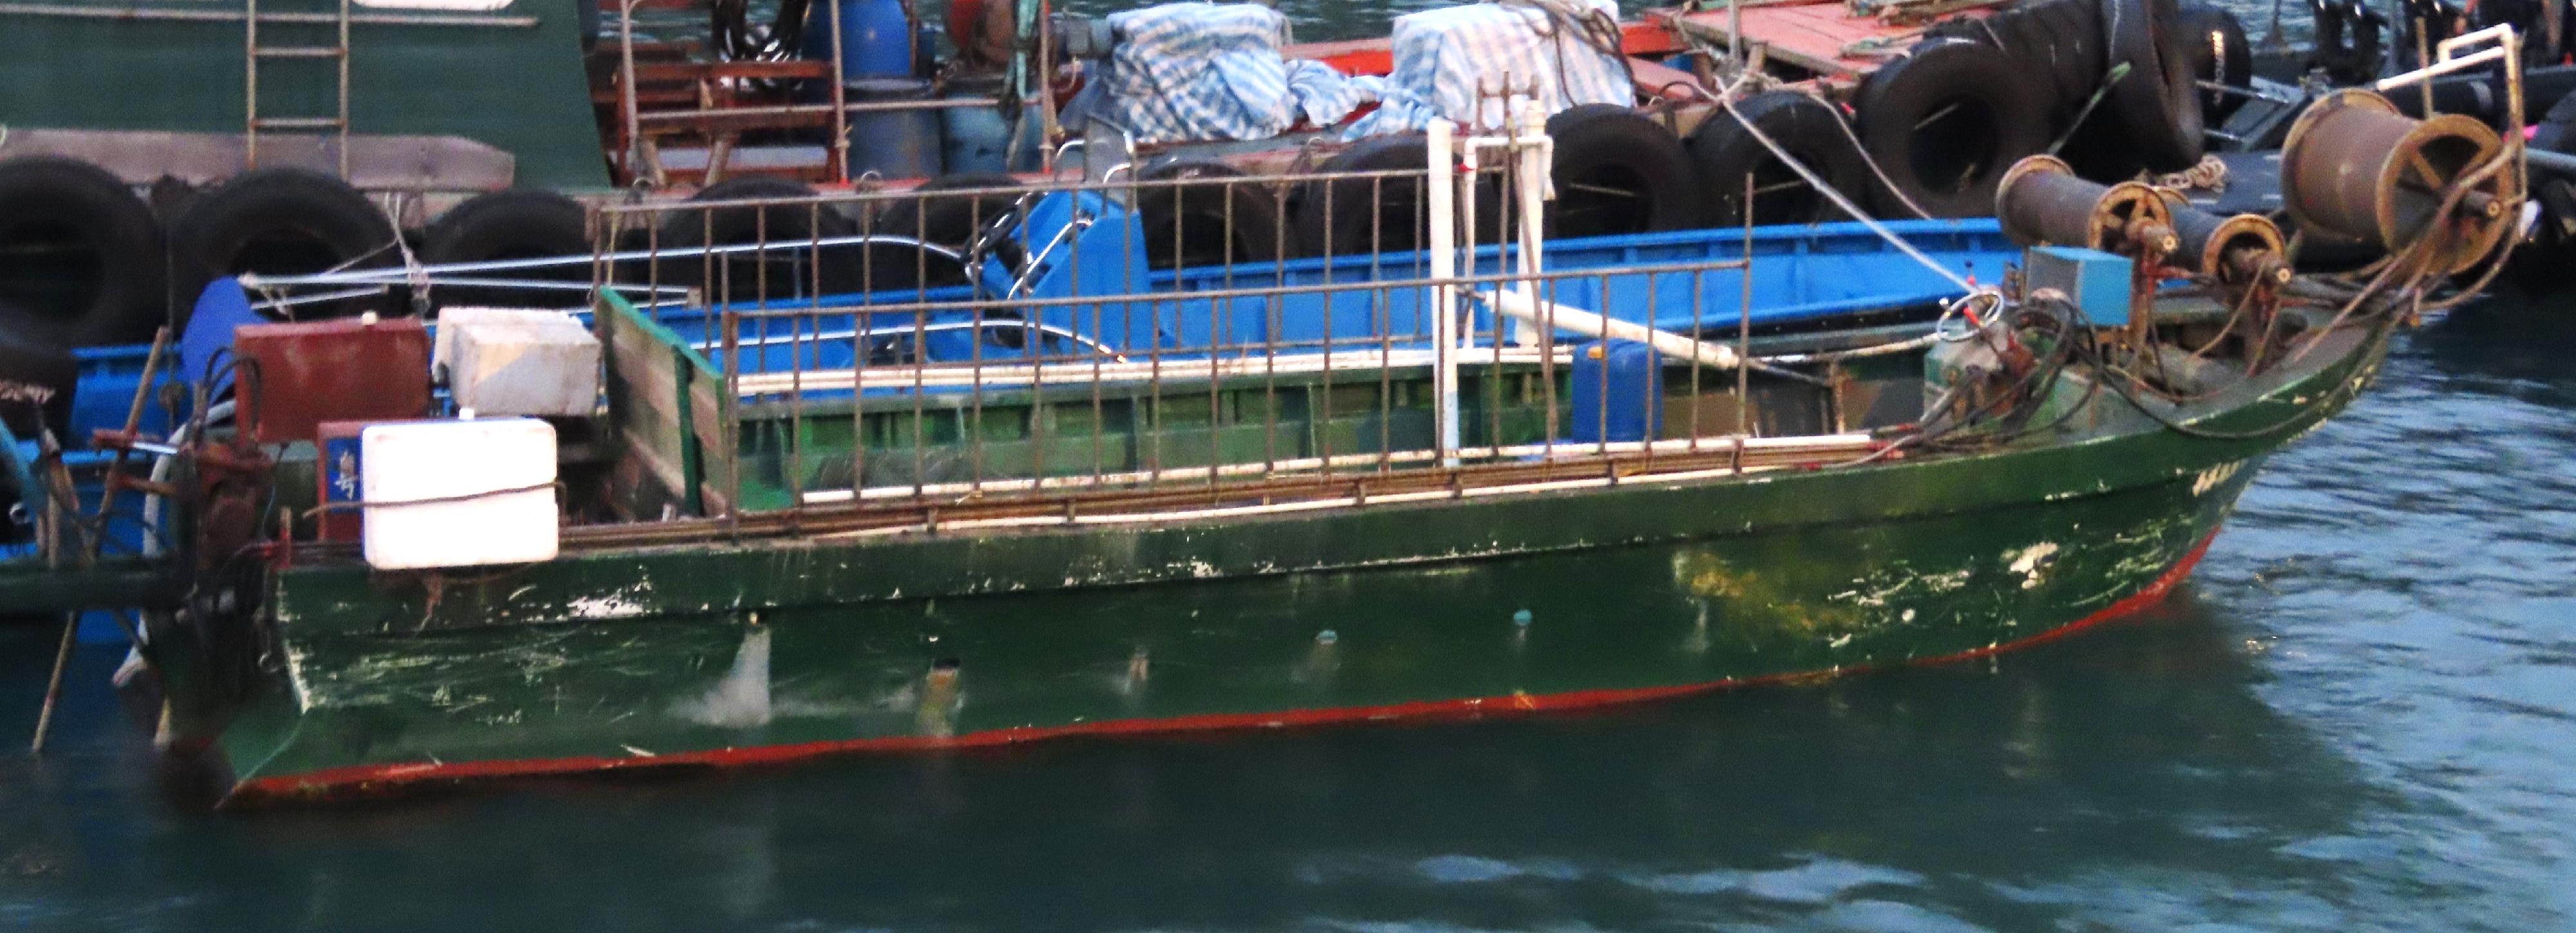 The Agriculture, Fisheries and Conservation Department today (December 4) laid charges against three Mainland men on board a Mainland vessel suspected of engaging in illegal fishing in Hong Kong waters off Sheung Pak Nai. Photo shows the intercepted Mainland vessel.